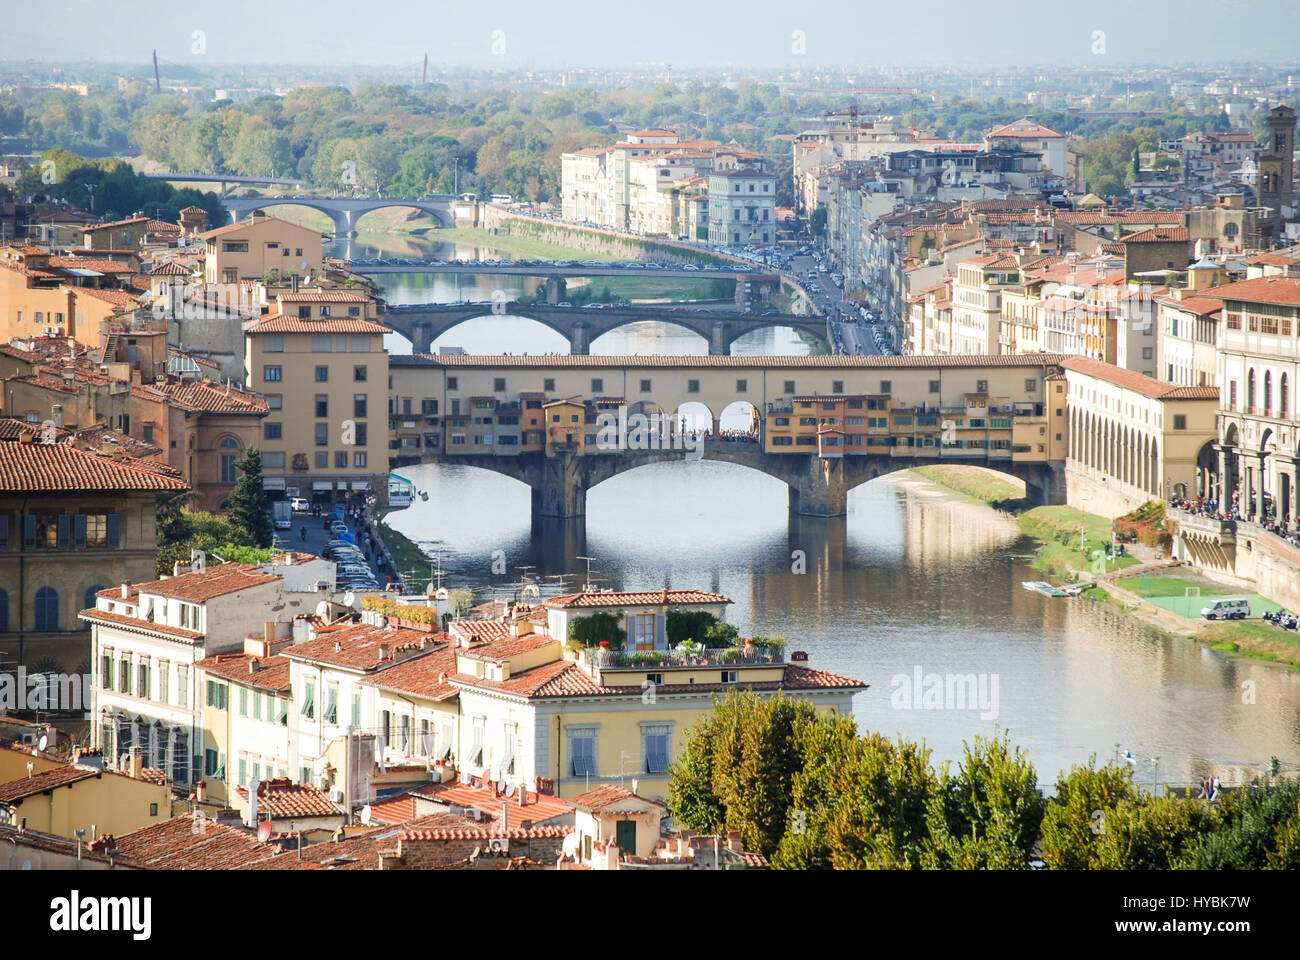 Looking down onto the bridge across the River Arno in Florence, Italy with the landmark Ponte Vecchio as the foremost. Stock Photo